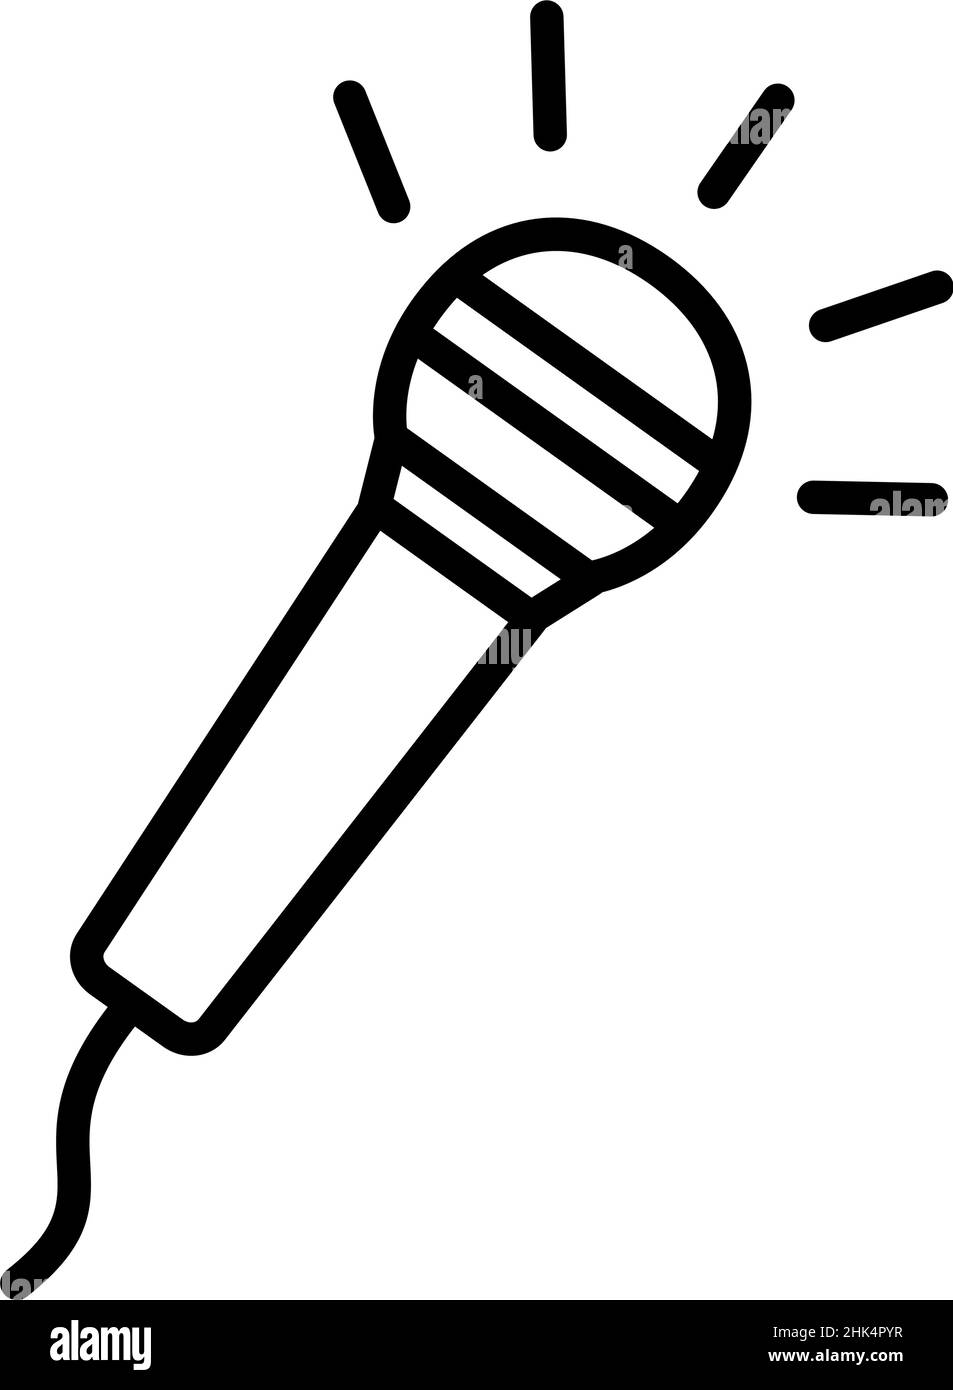 Microphone icon on white background, vector illustration Stock Vector